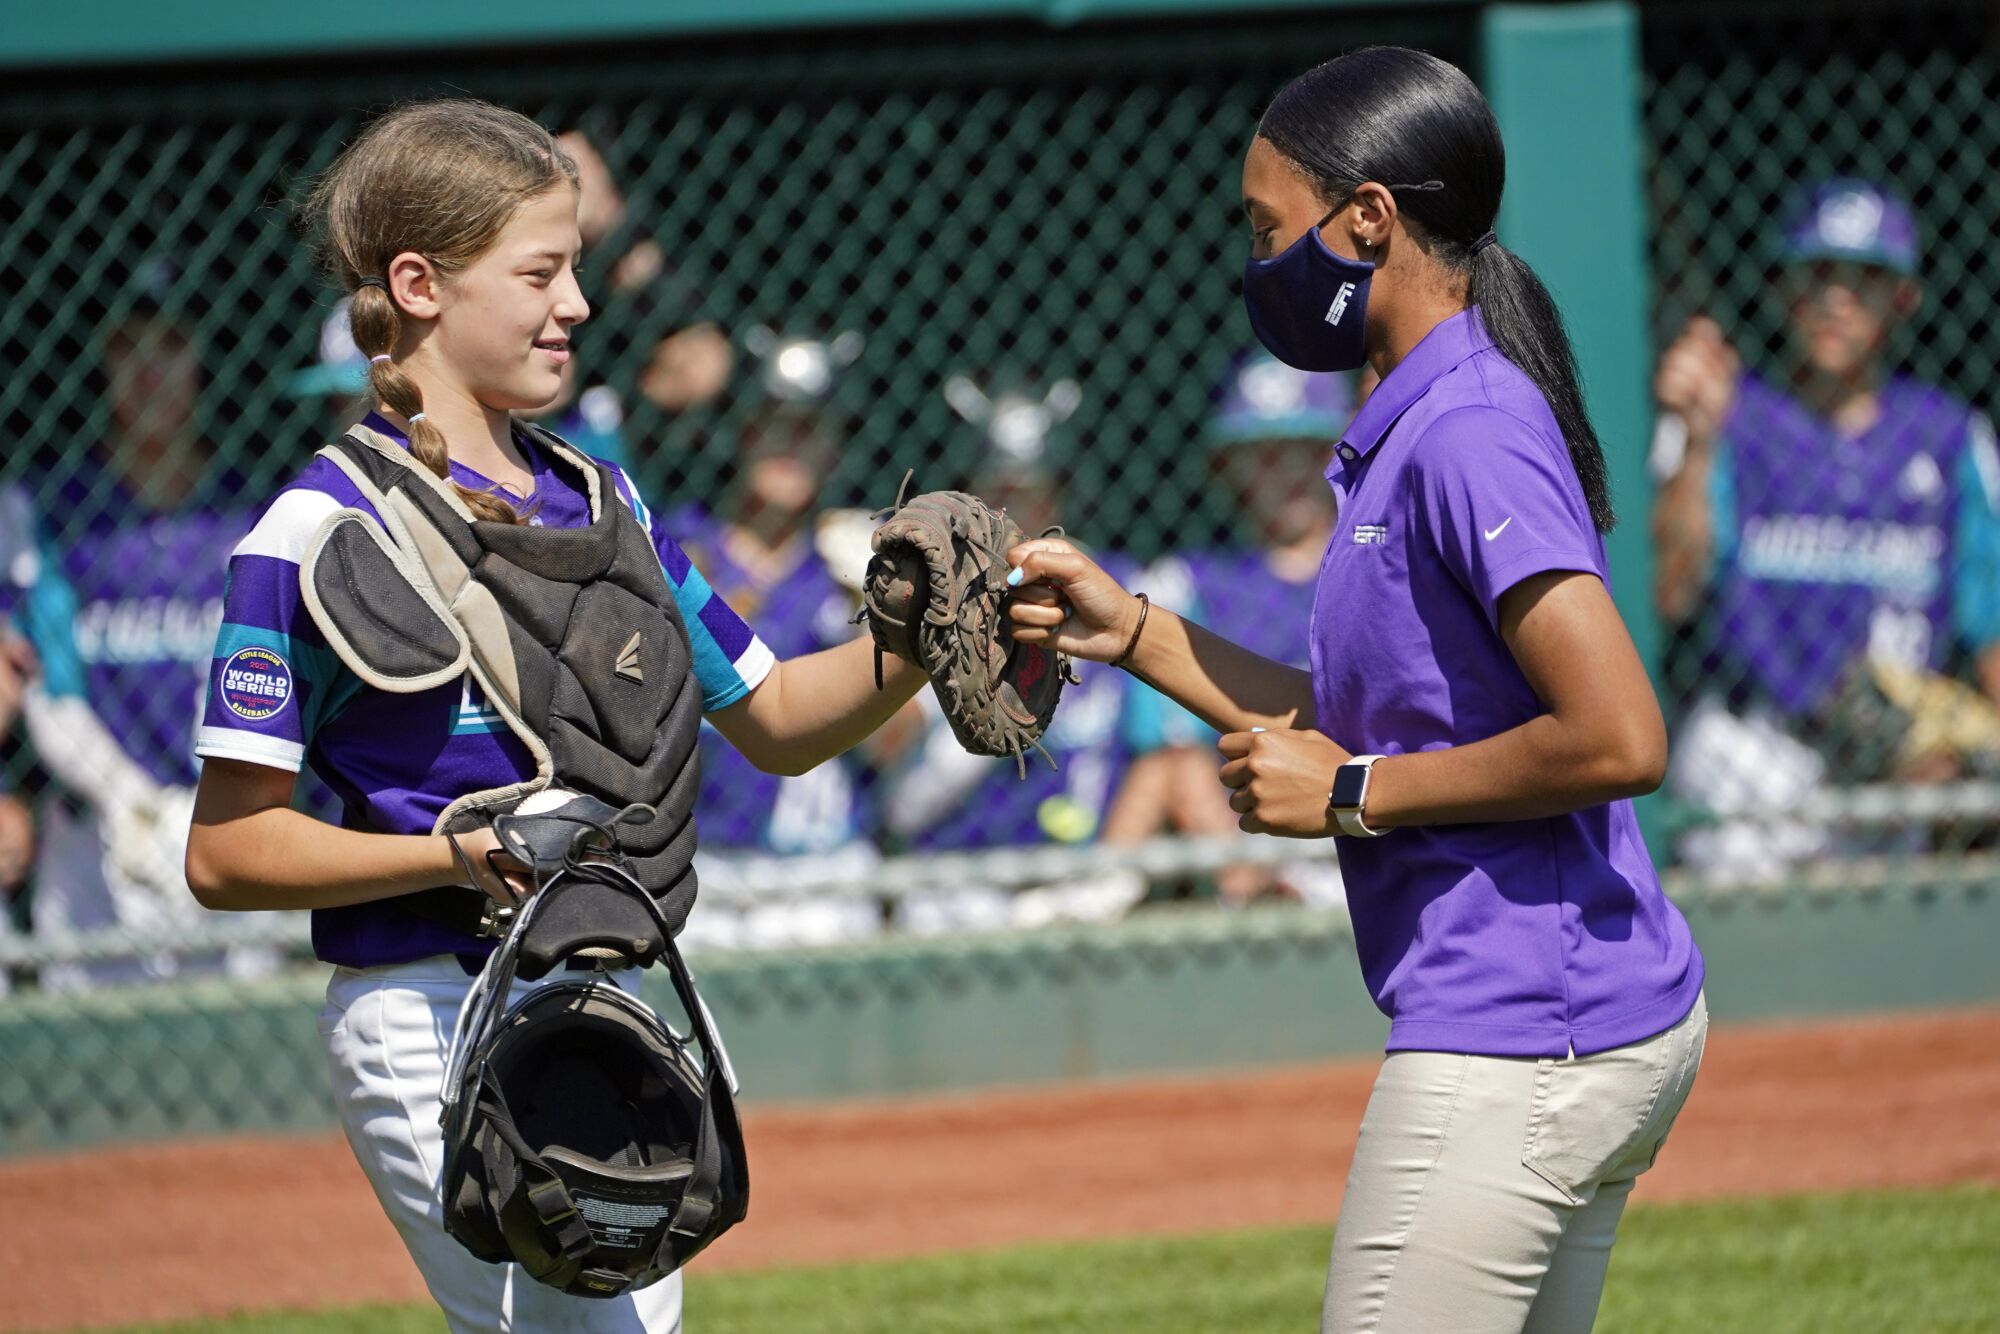 Abilene, Texas catcher Ella Bruning (8) fist bumps with Mo'ne Davis after Davis threw out the first pitch.